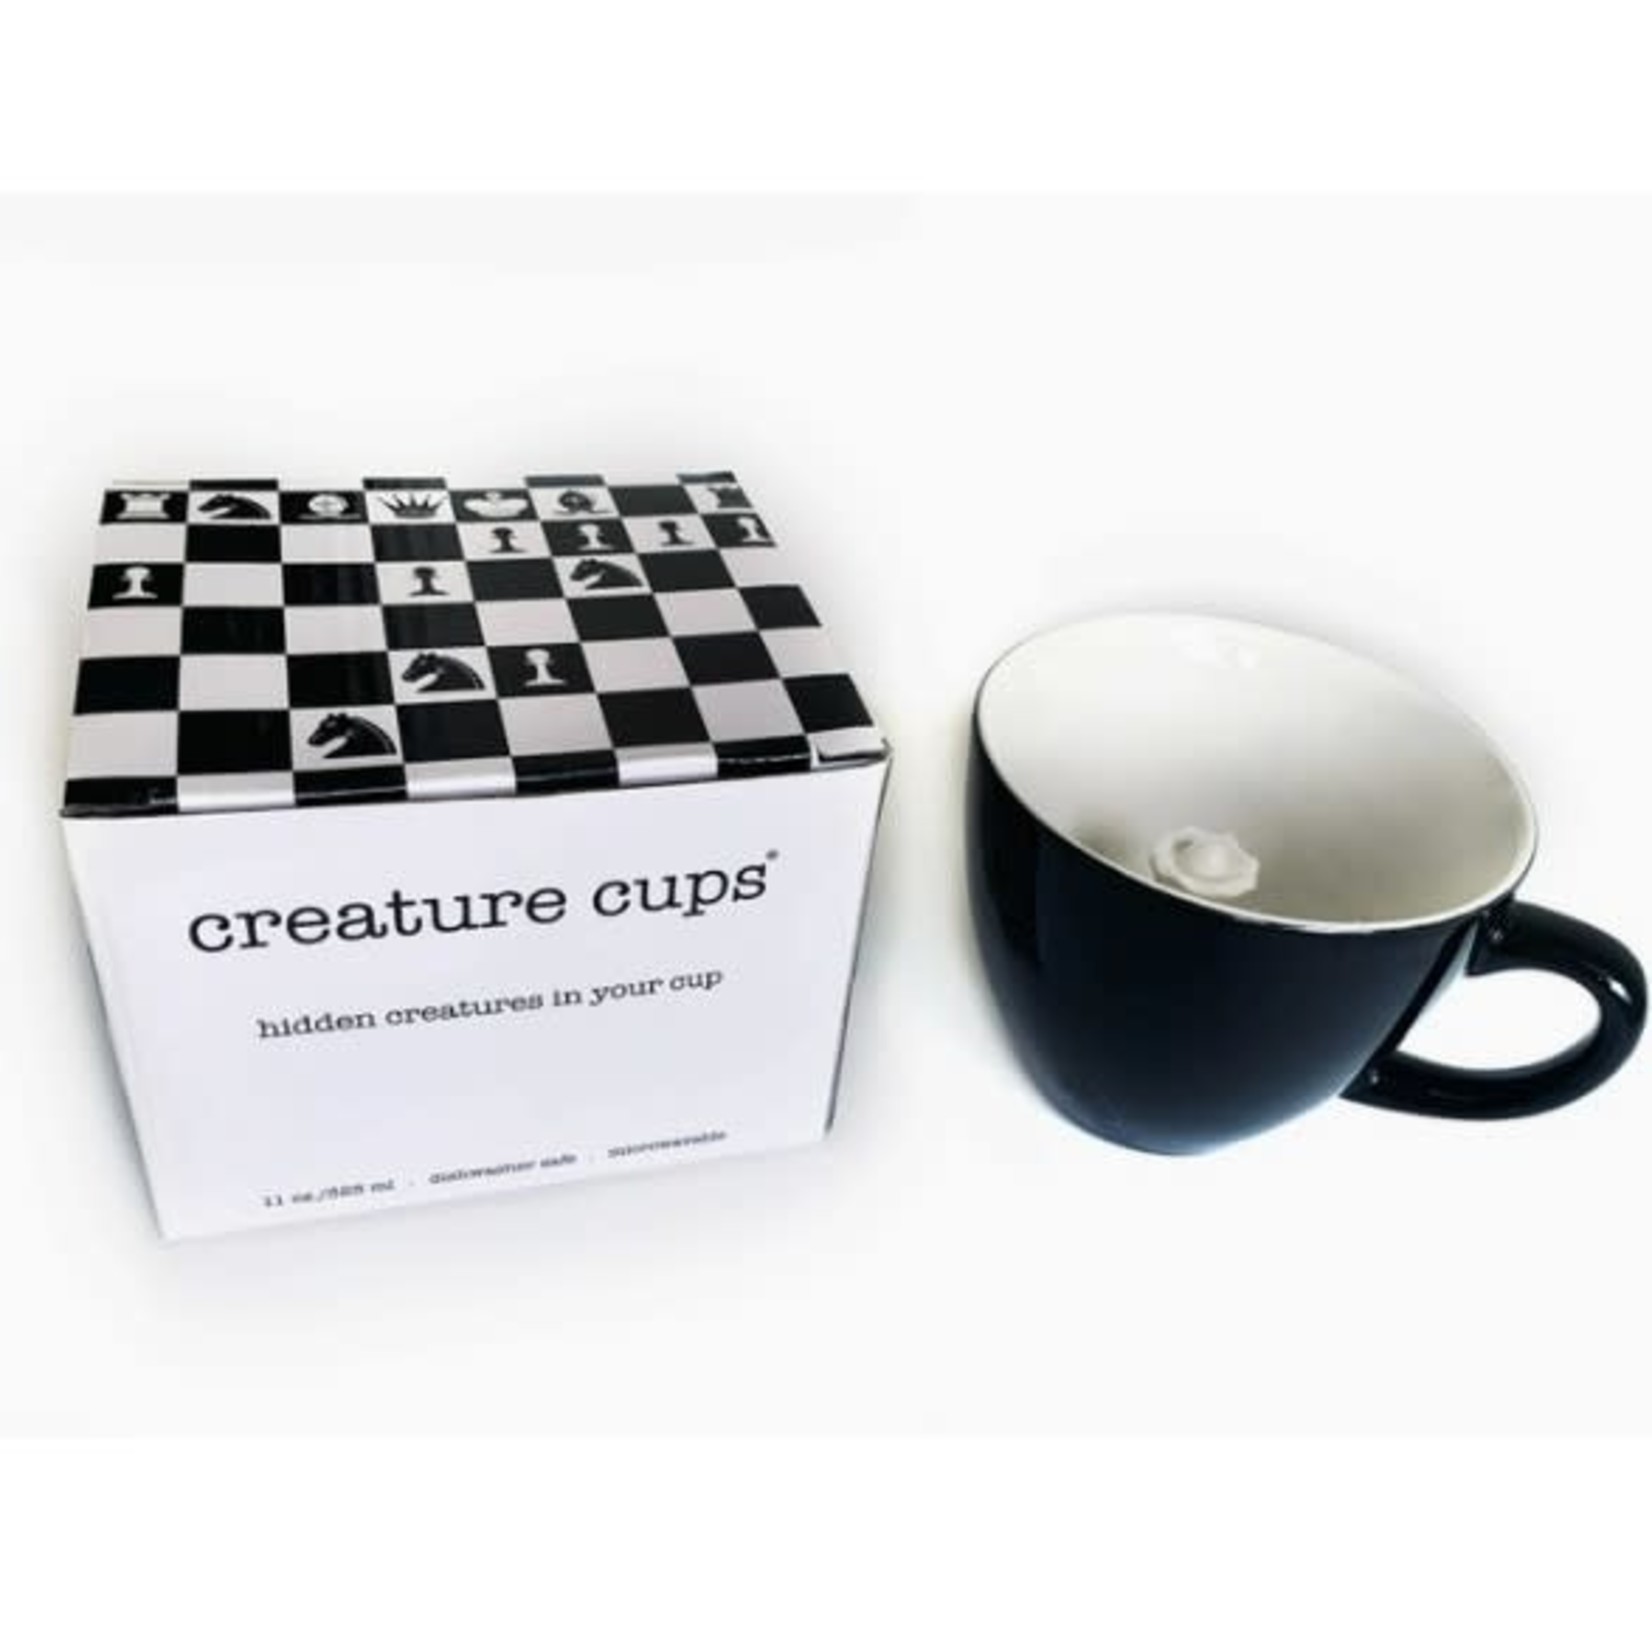 Creature Cups Queen of Chess 11 oz. Cup (Black)